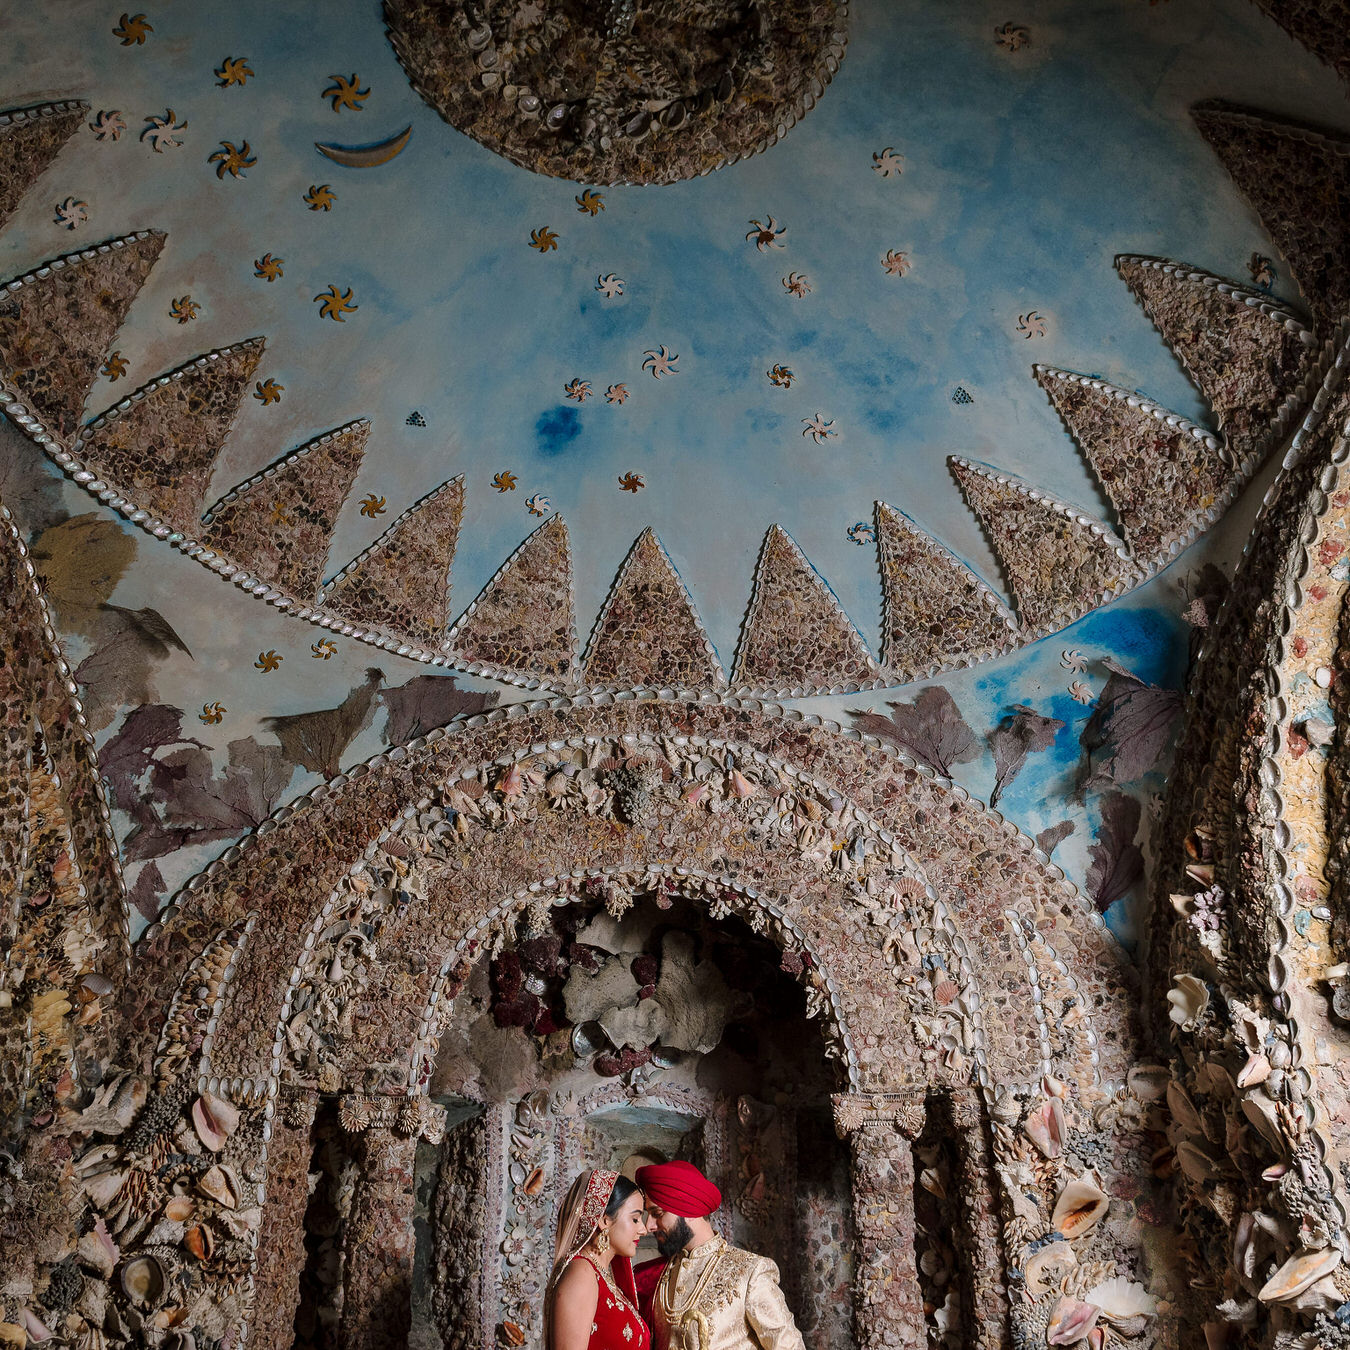 Sikh Asian wedding photographs inside the Hampton Court House shell grotto showing a blue sky with stars and moon made out of shells.